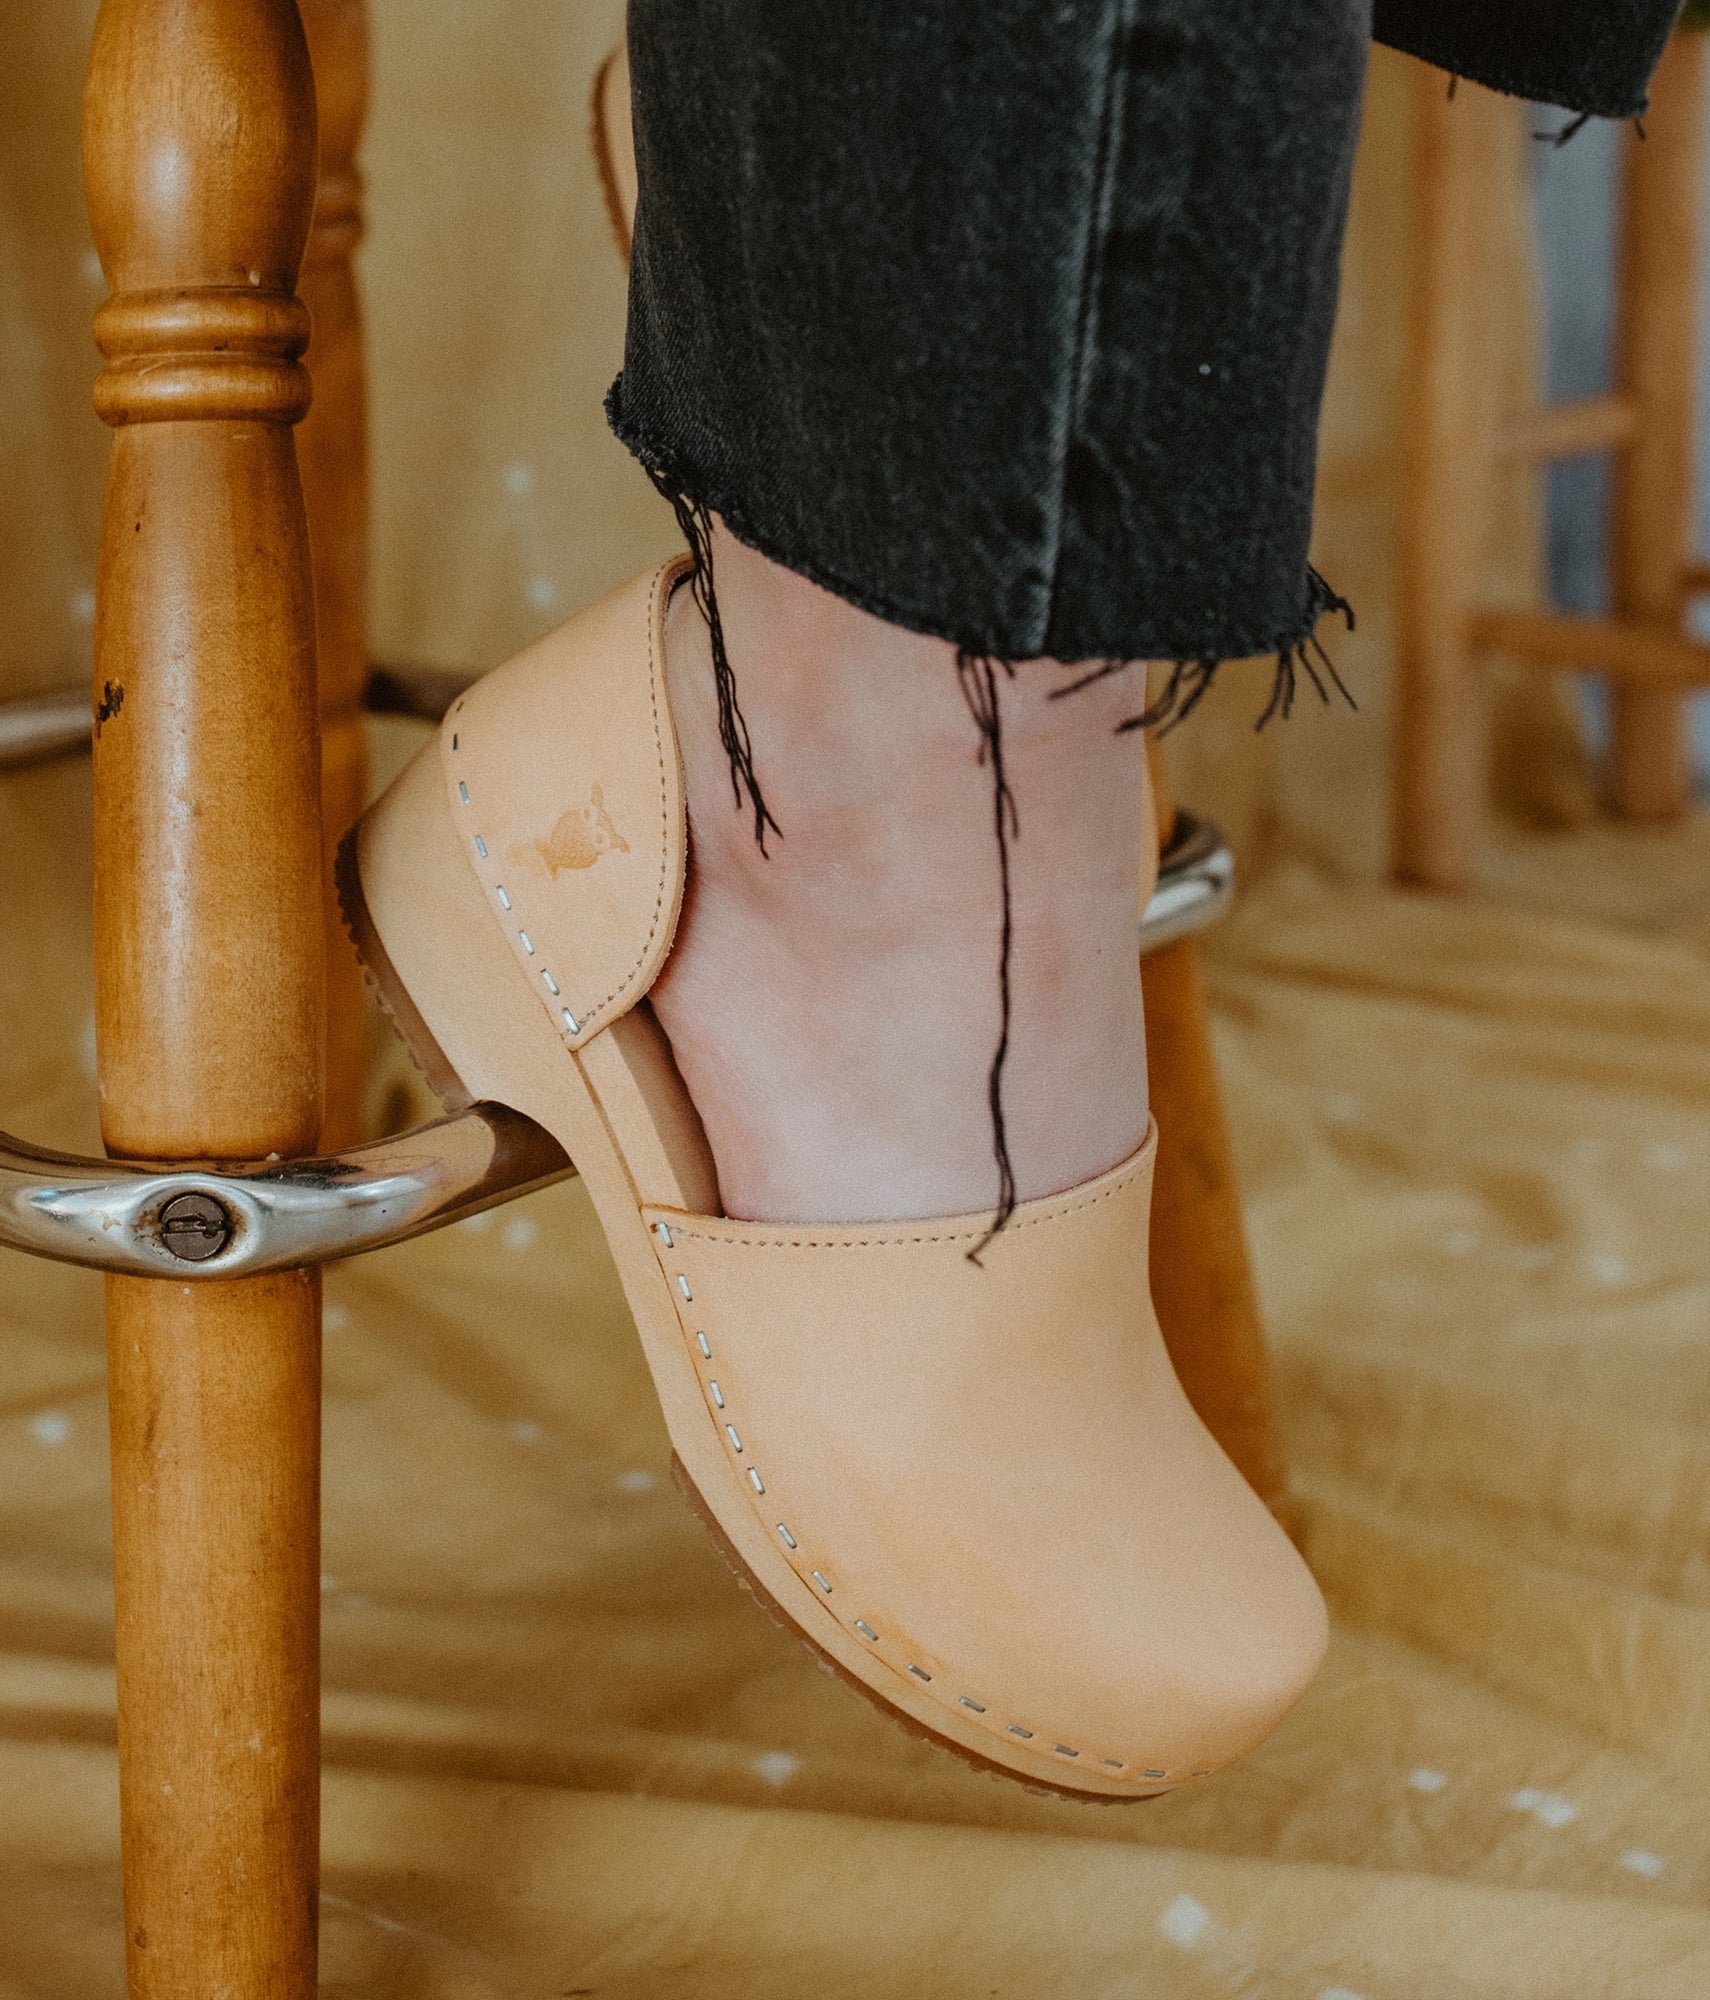 ow heeled closed-back clogs in beige vegetable tanned leather stapled on a light wooden base